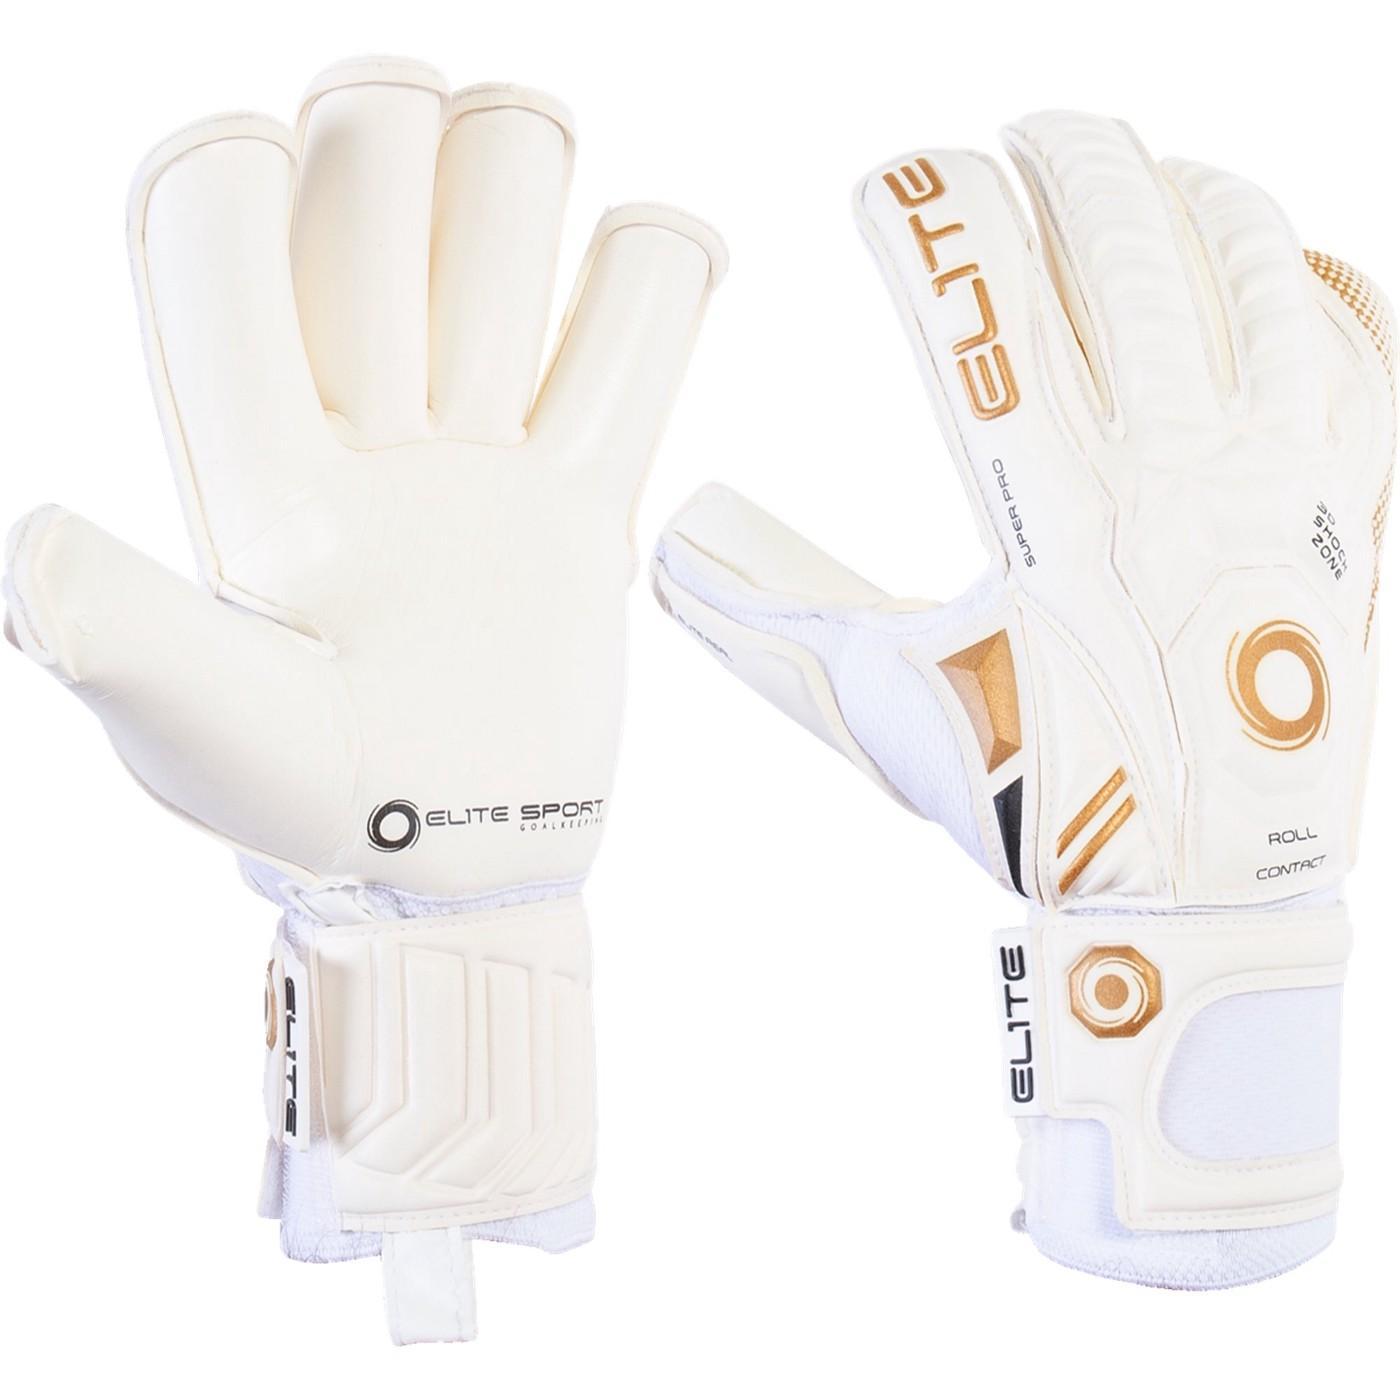 Rolled finger cut goalkeeper gloves from Elite Sport. They are white with a gold logo lettering.